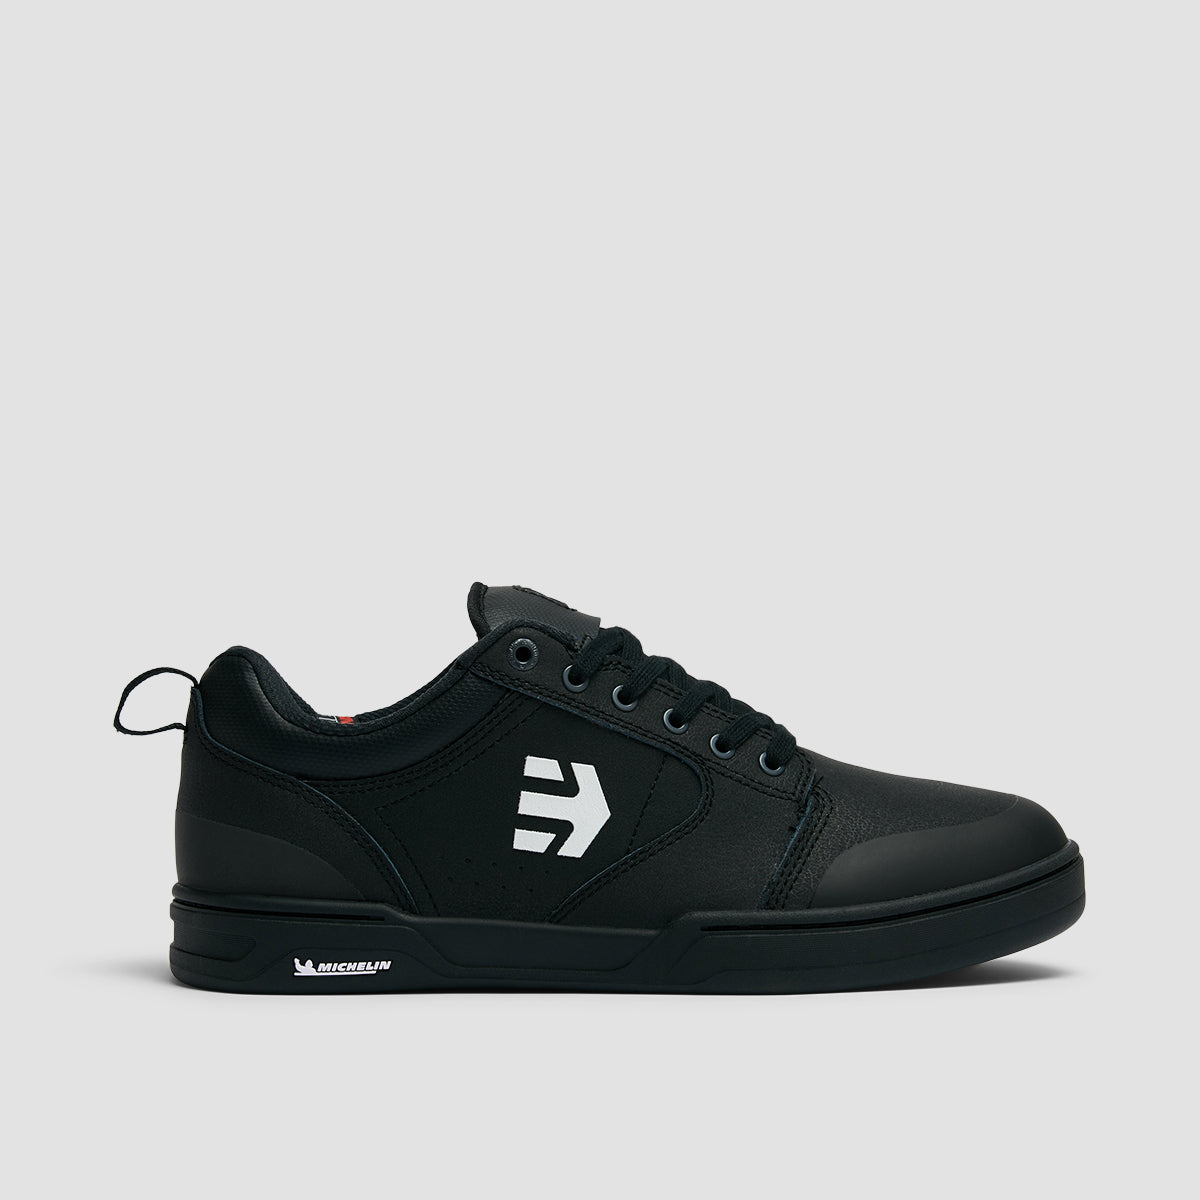 Etnies Camber Michelin Shoes - Black/White